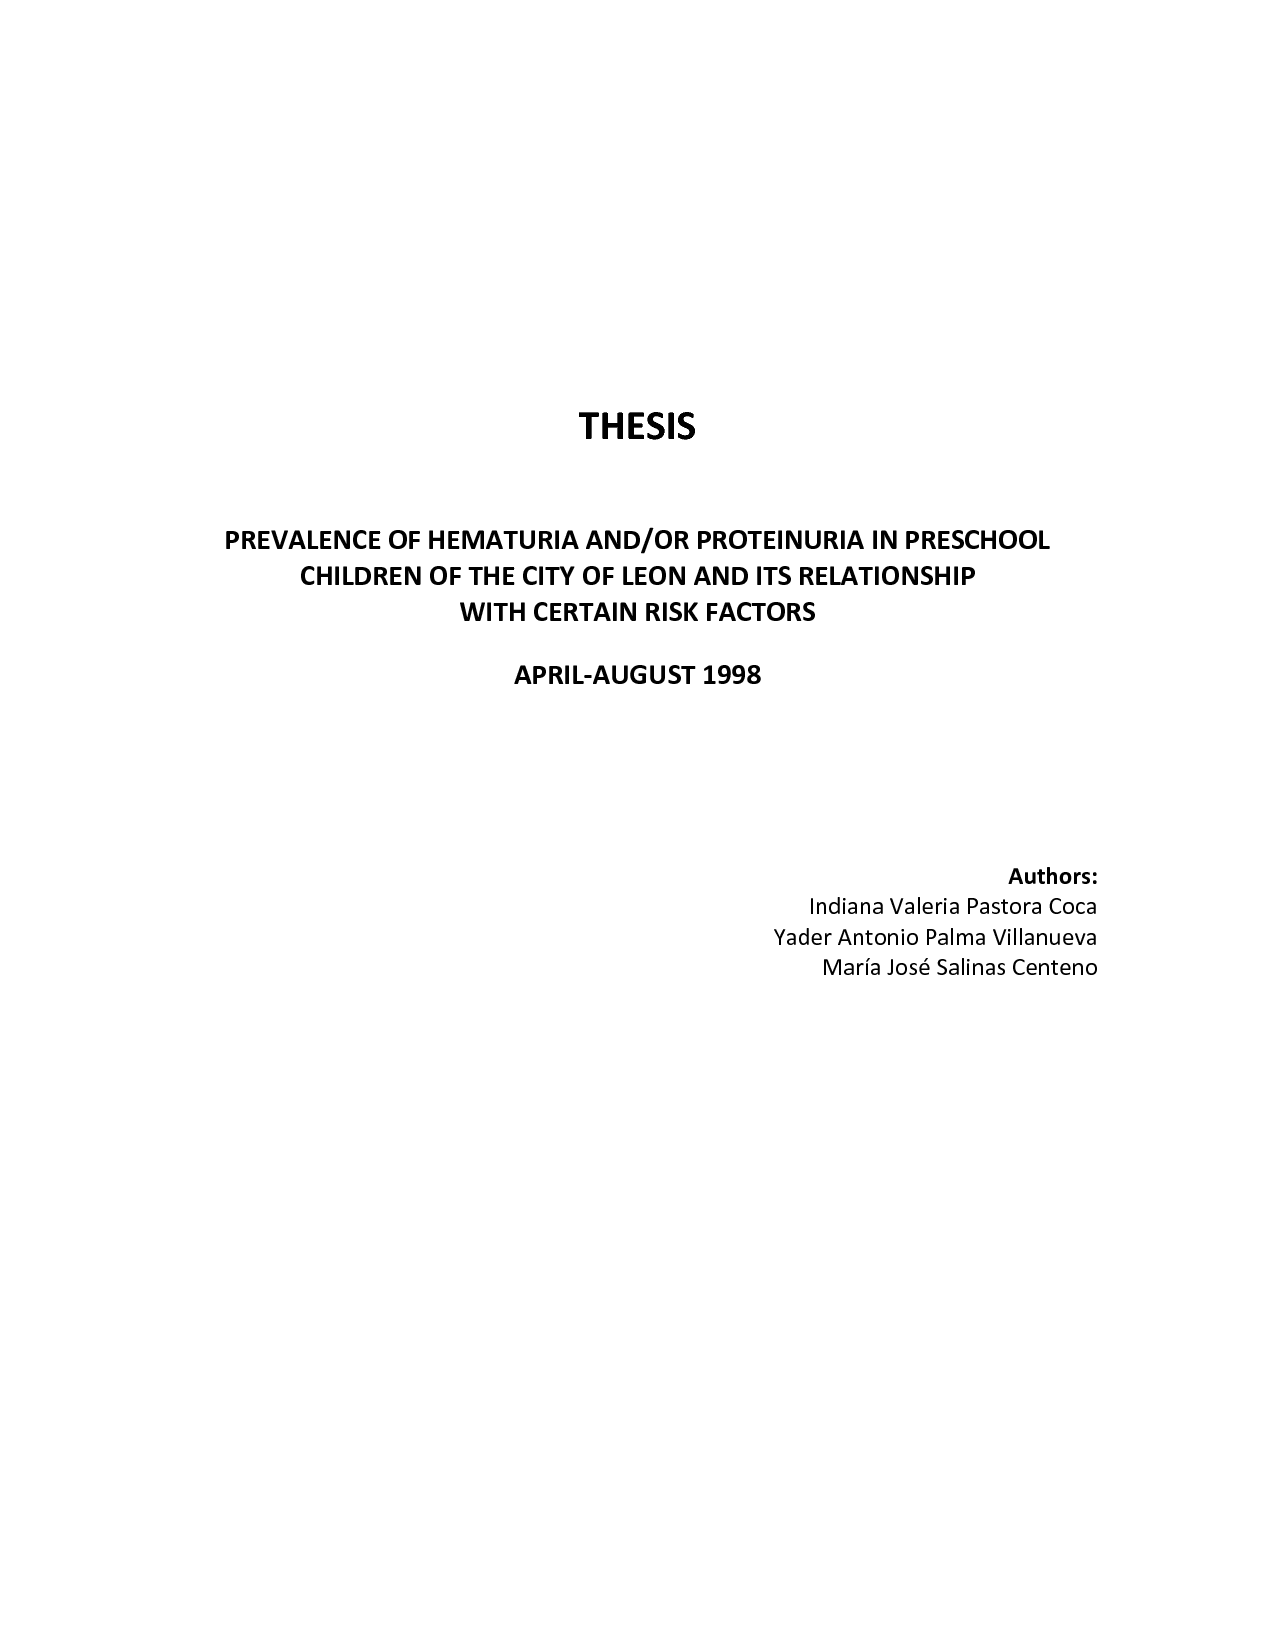 This thesis is dedicated to god